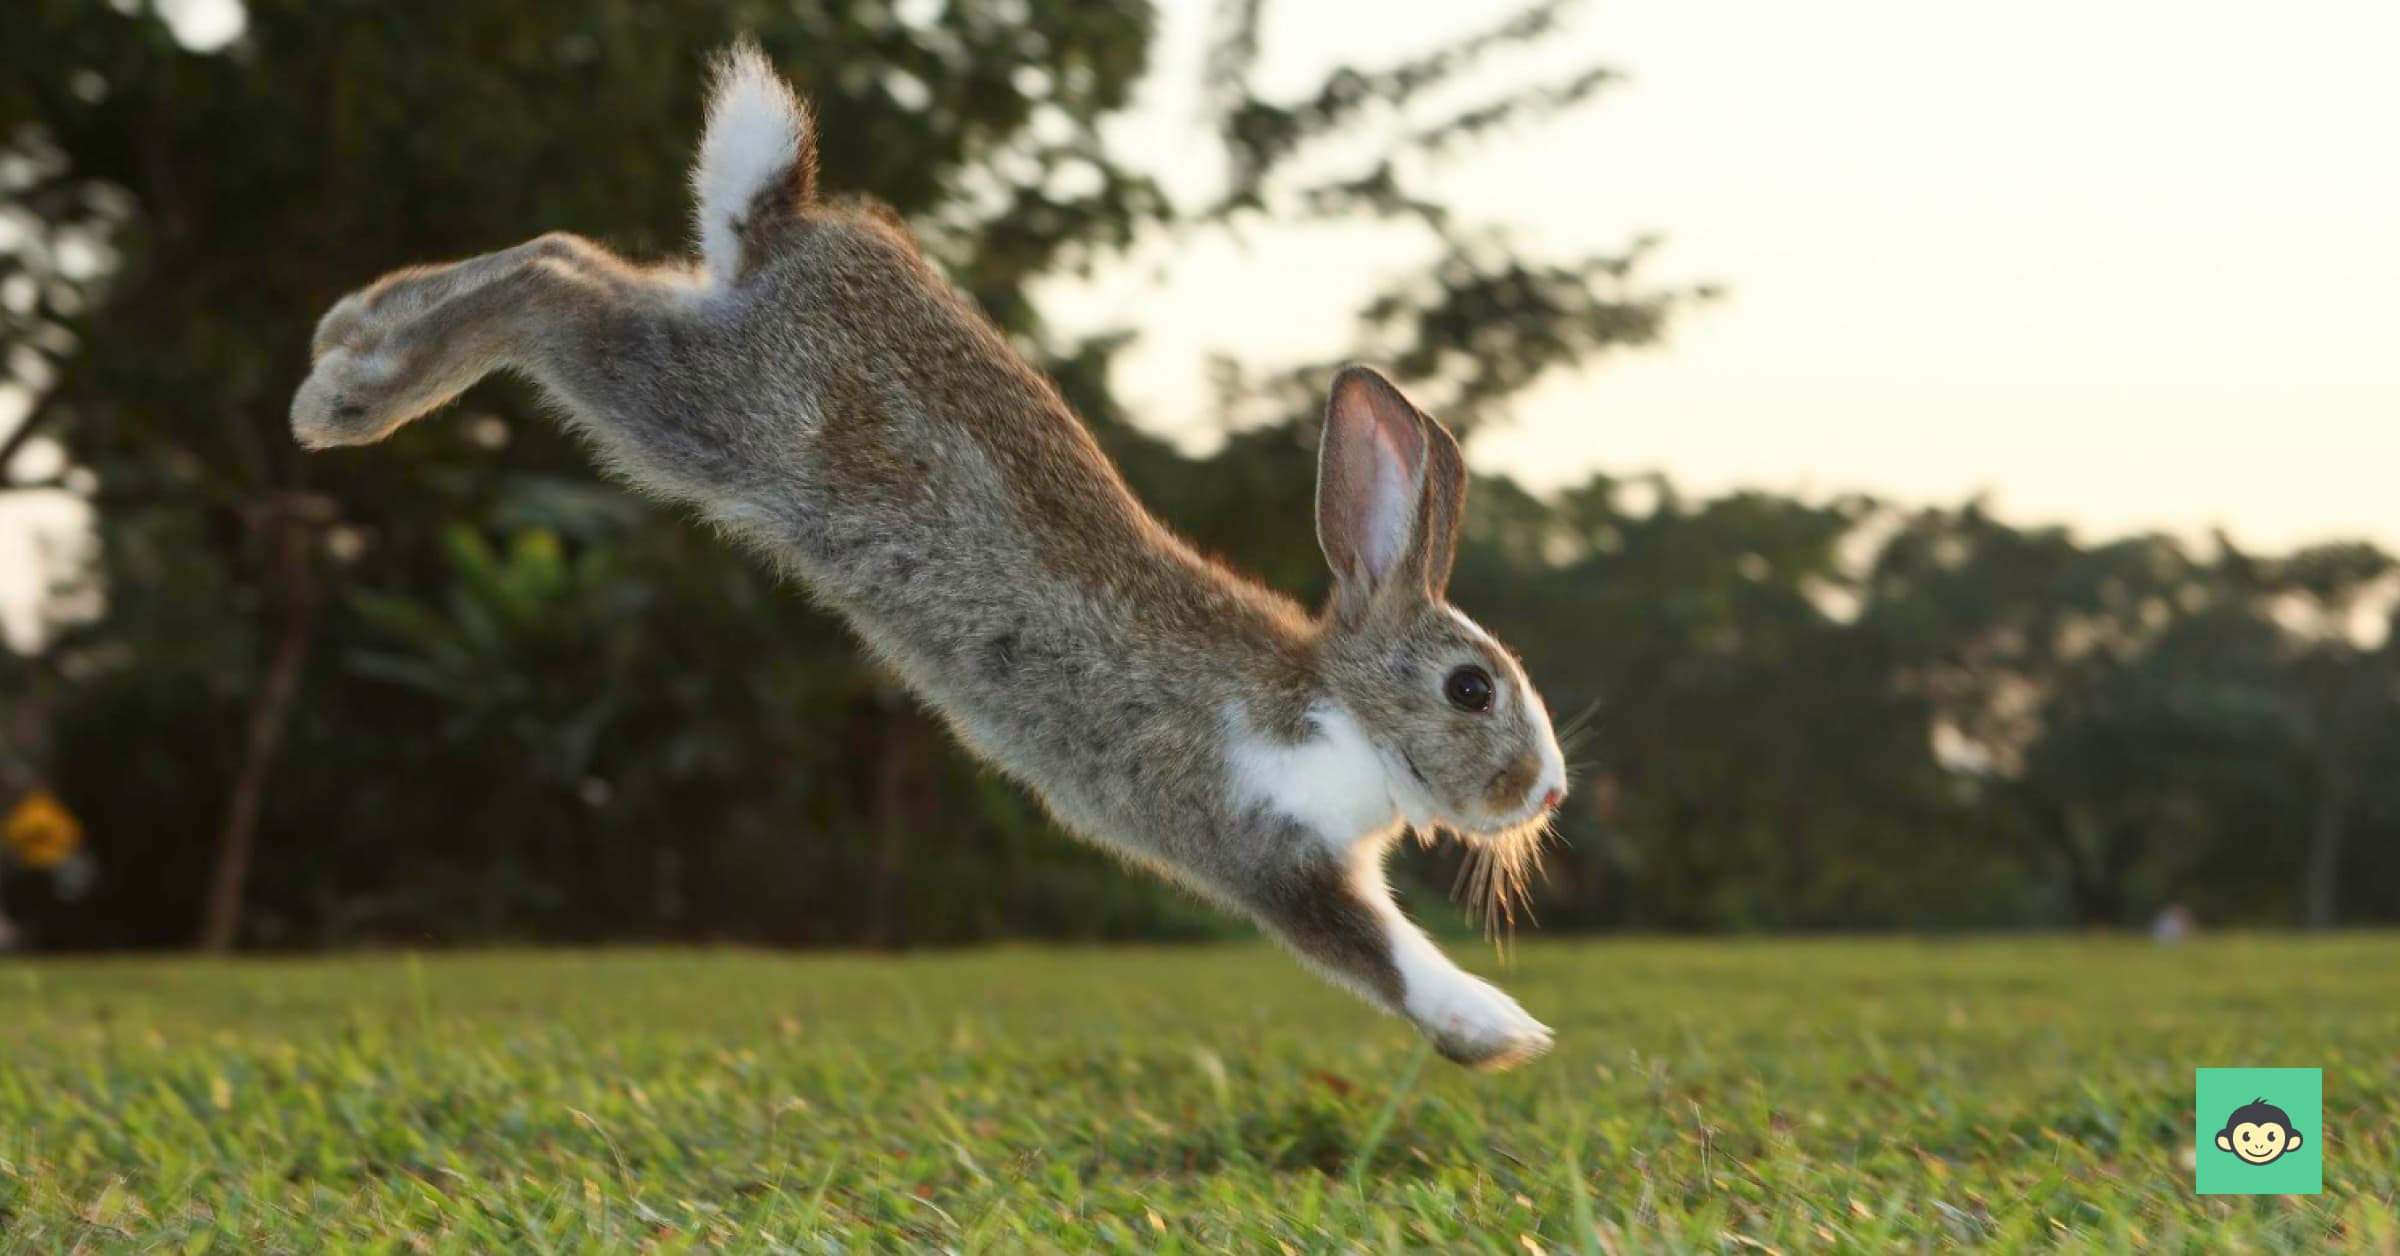 The employee experience is like a bunny hop, sometimes bumpy but always cute.